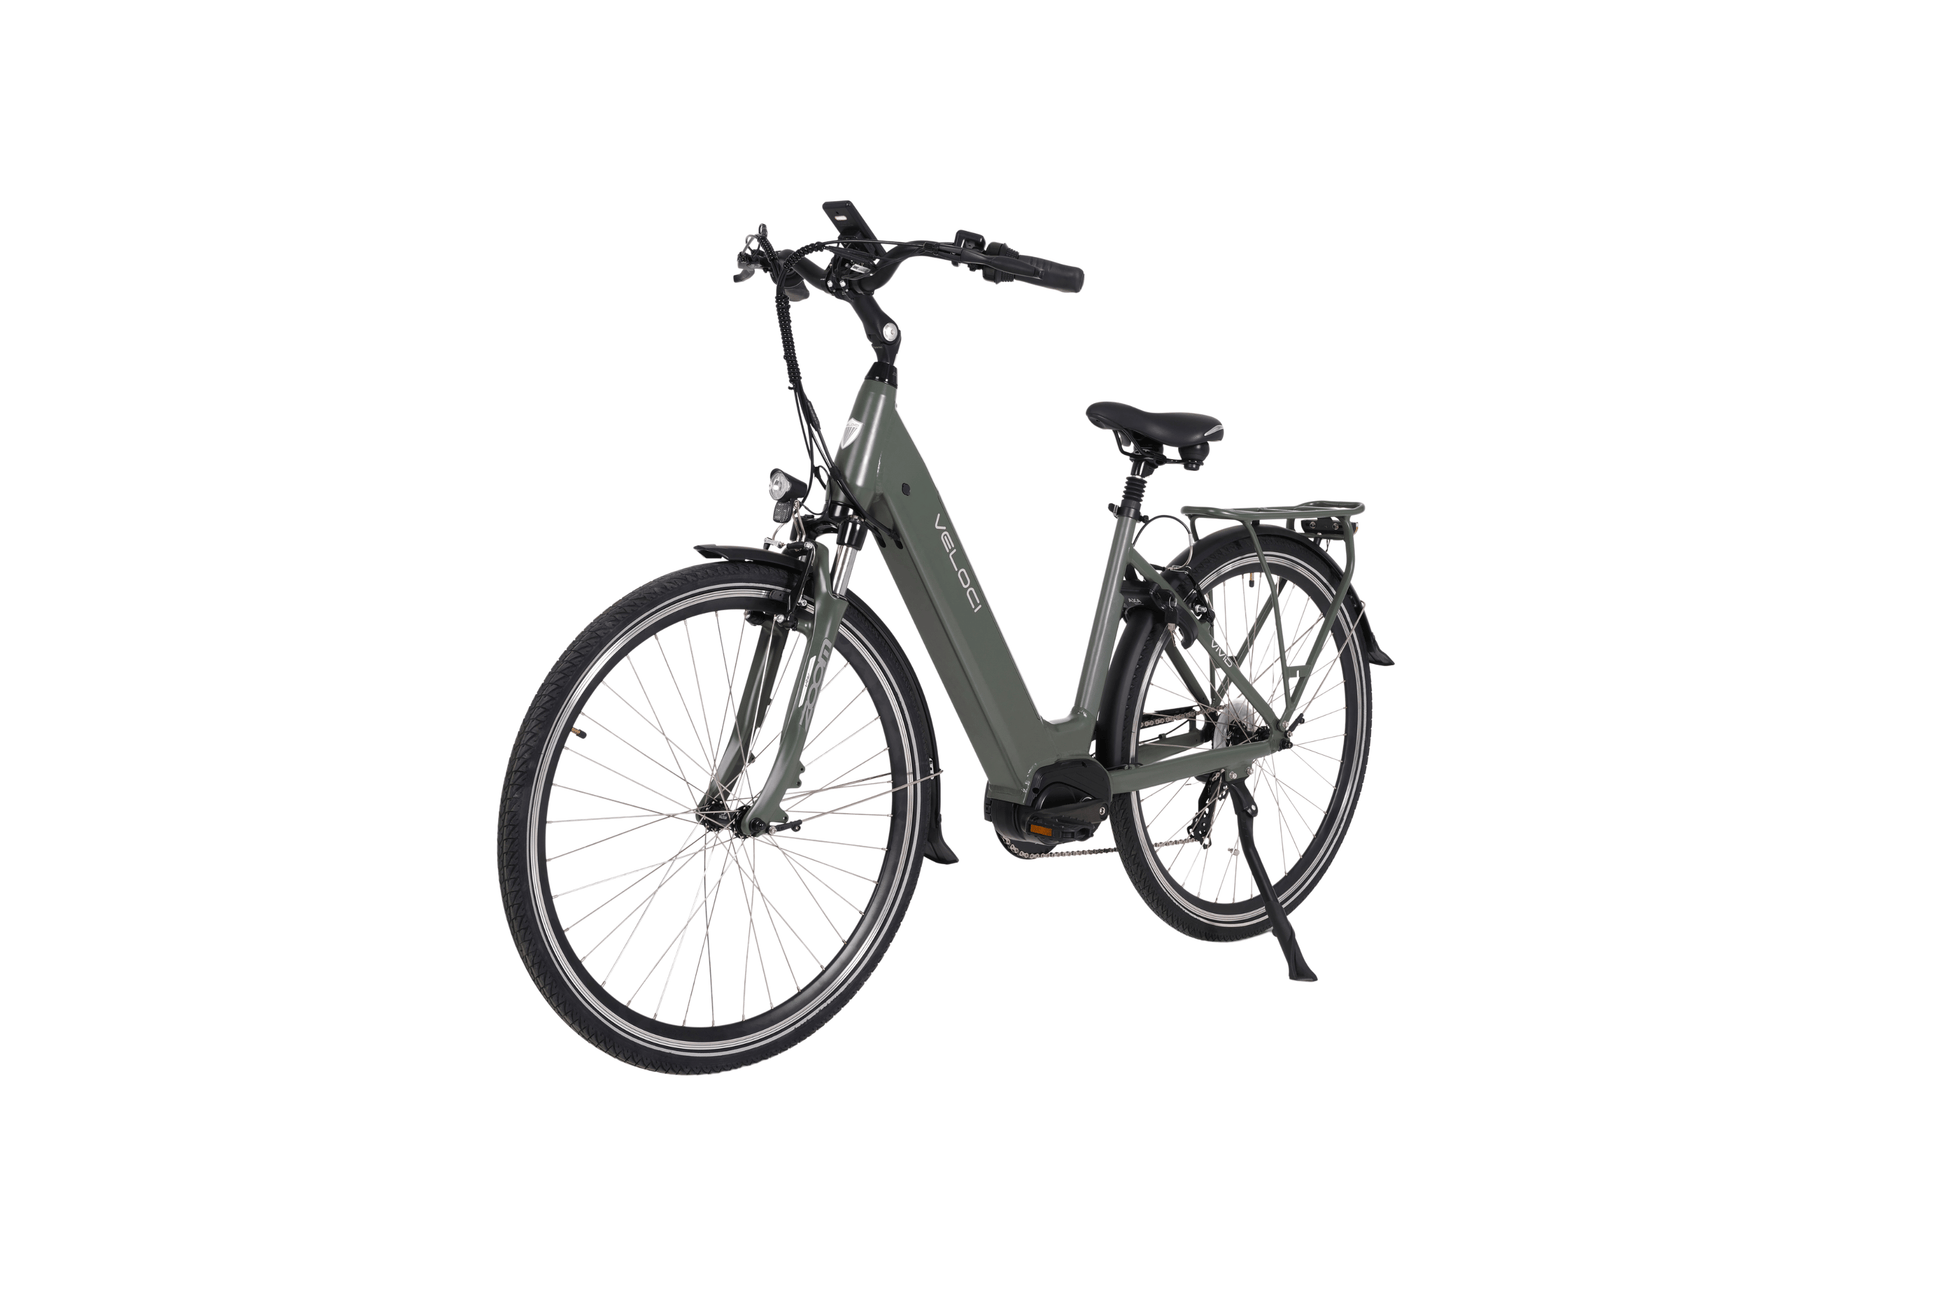 Veloci Vivid electric bike in the colour "Crater Grey" available for sale.